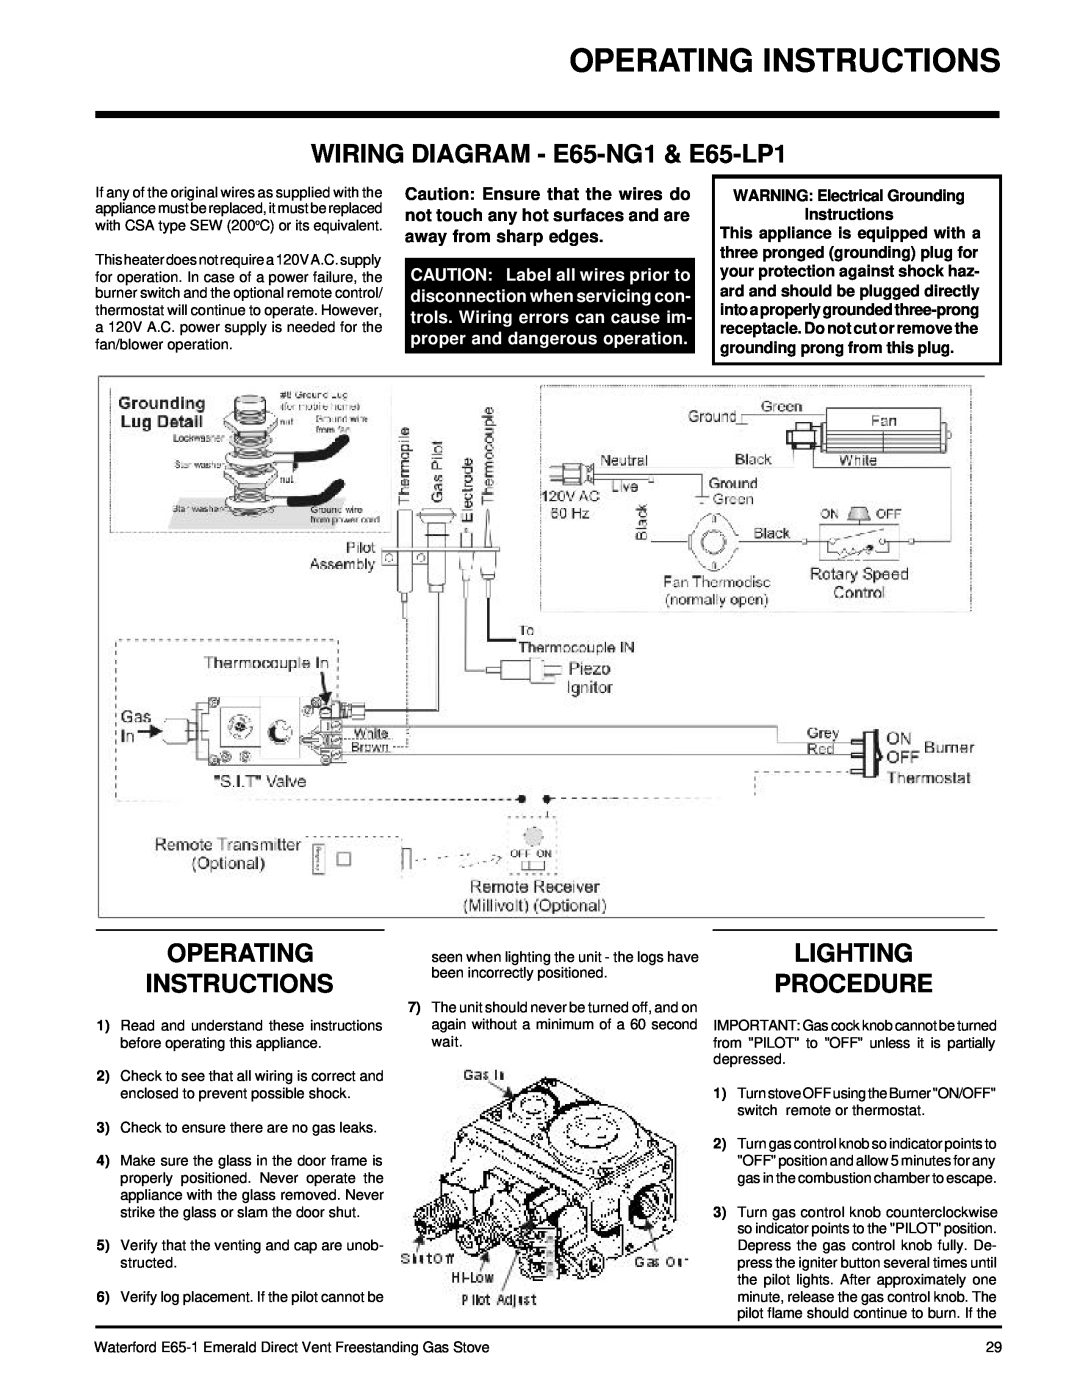 Waterford Appliances installation manual Operating Instructions, WIRING DIAGRAM - E65-NG1& E65-LP1, Lighting Procedure 